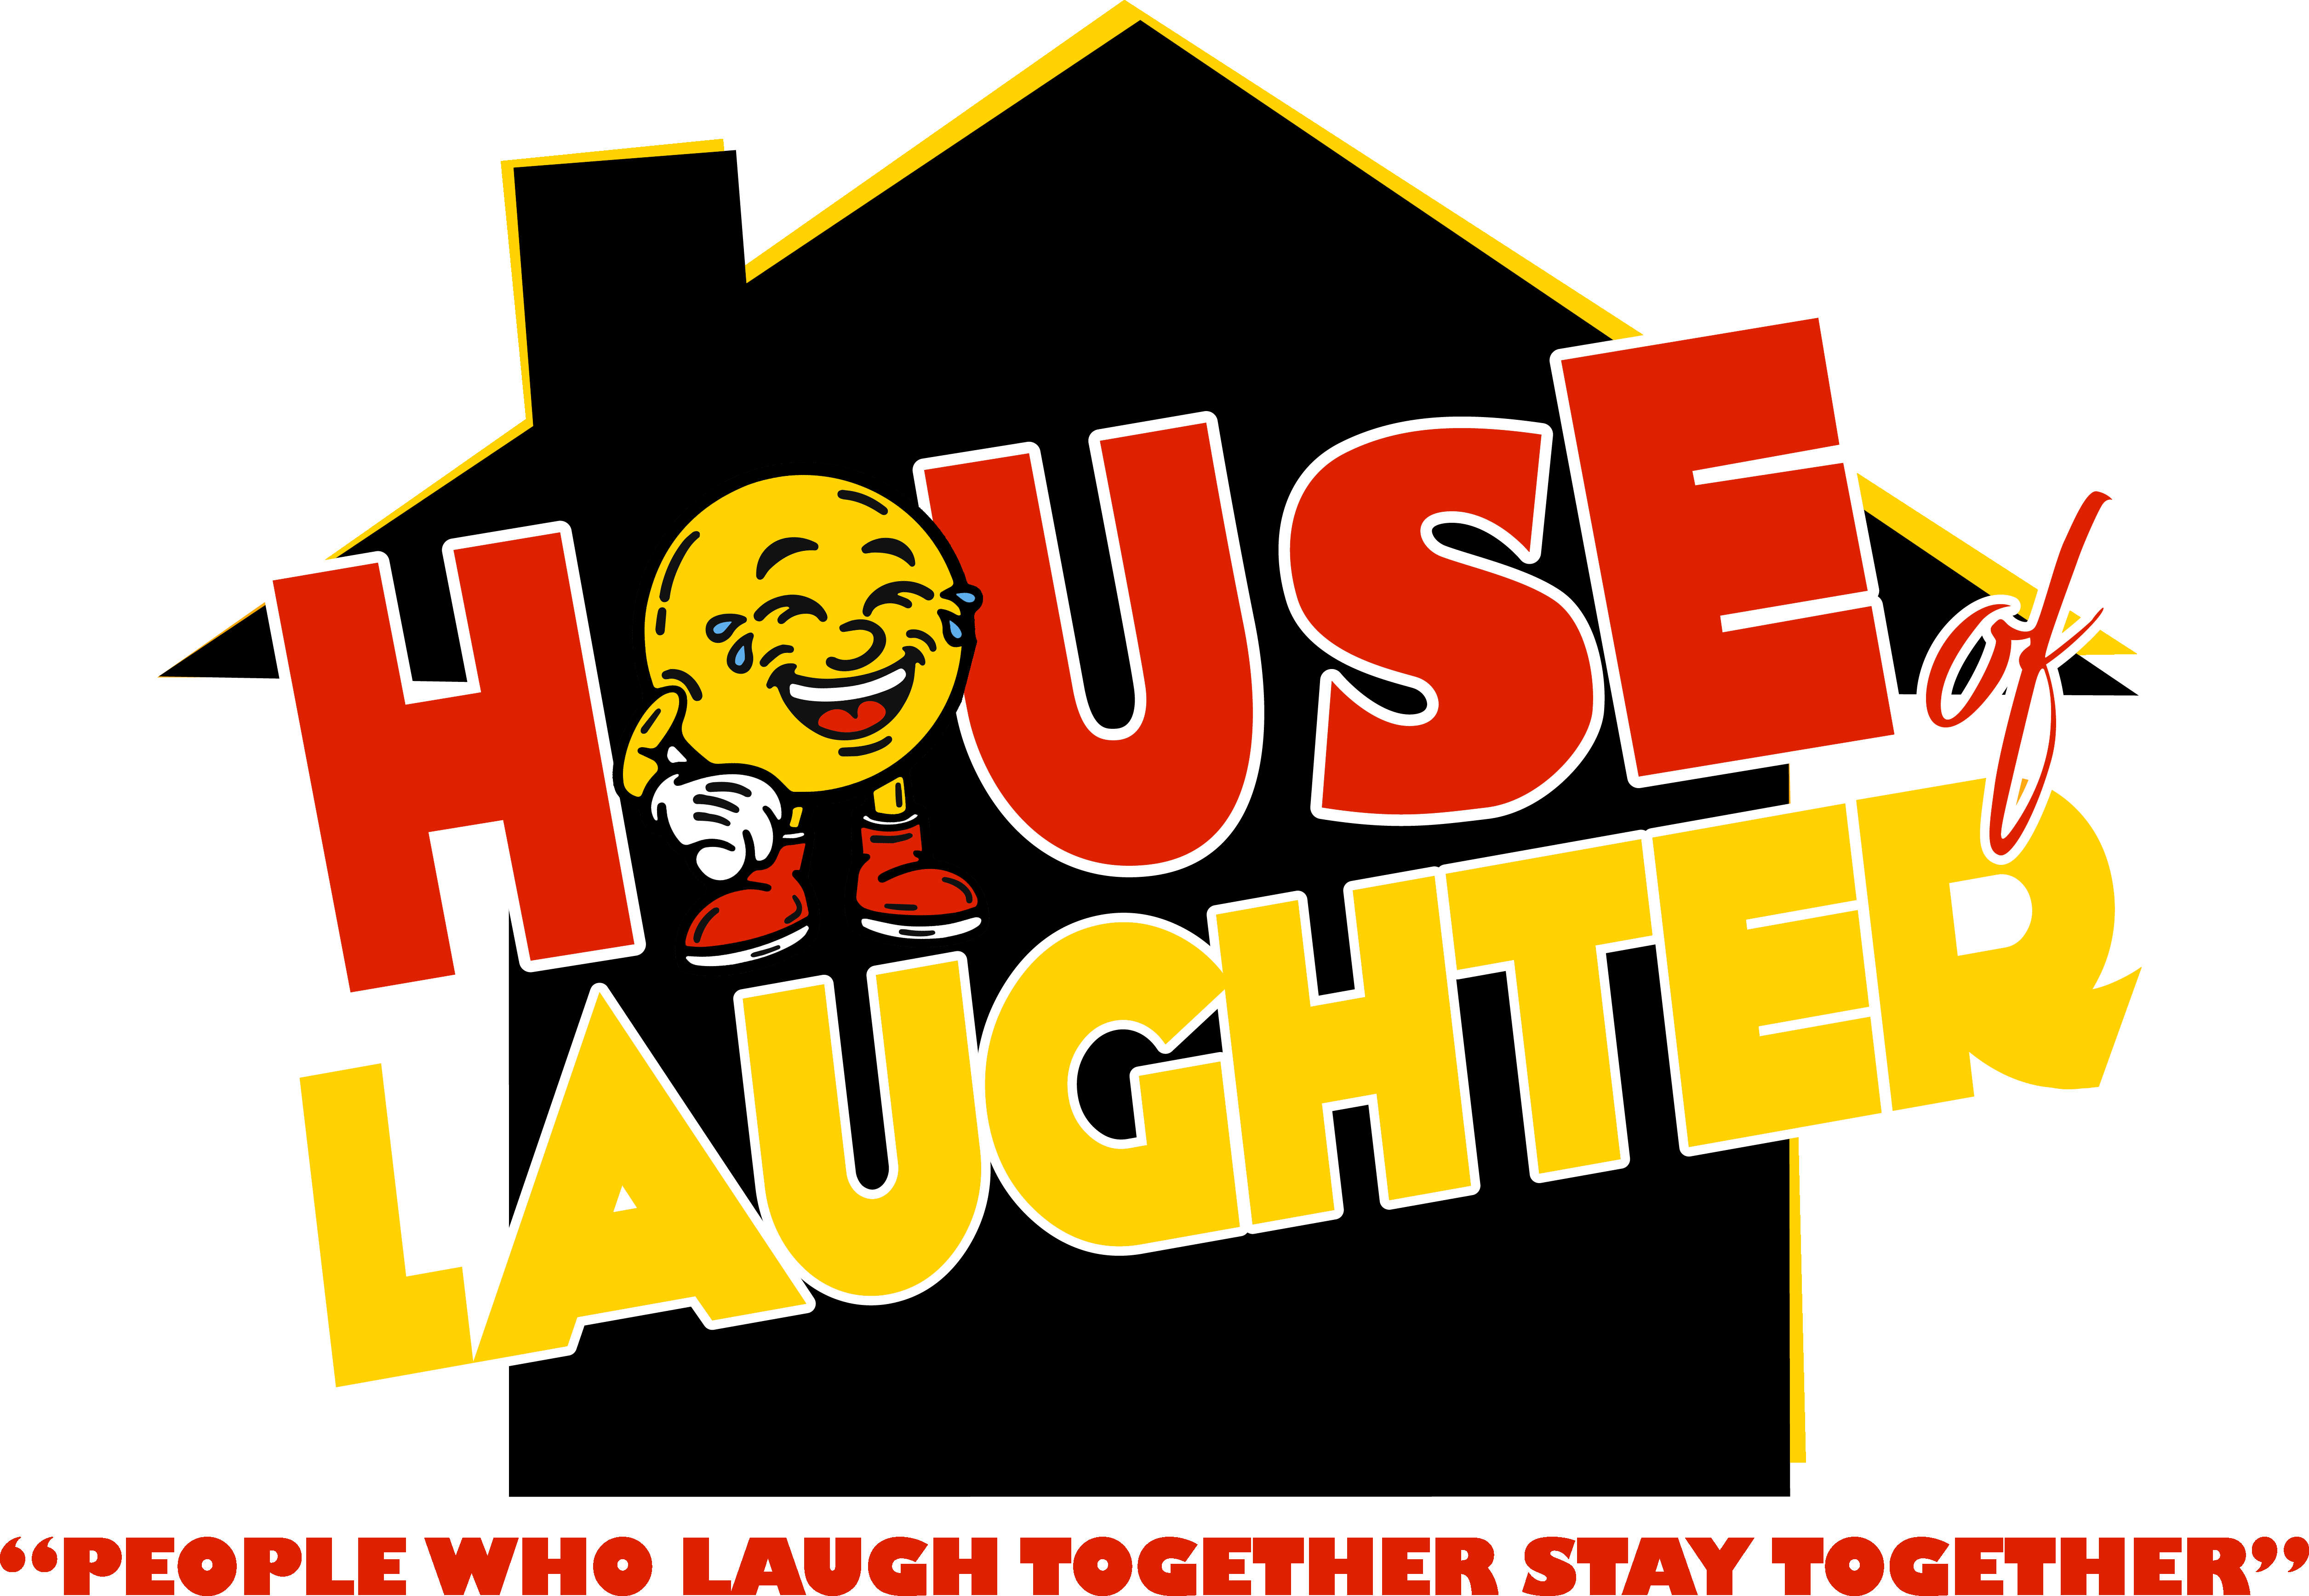 The House of Laughter